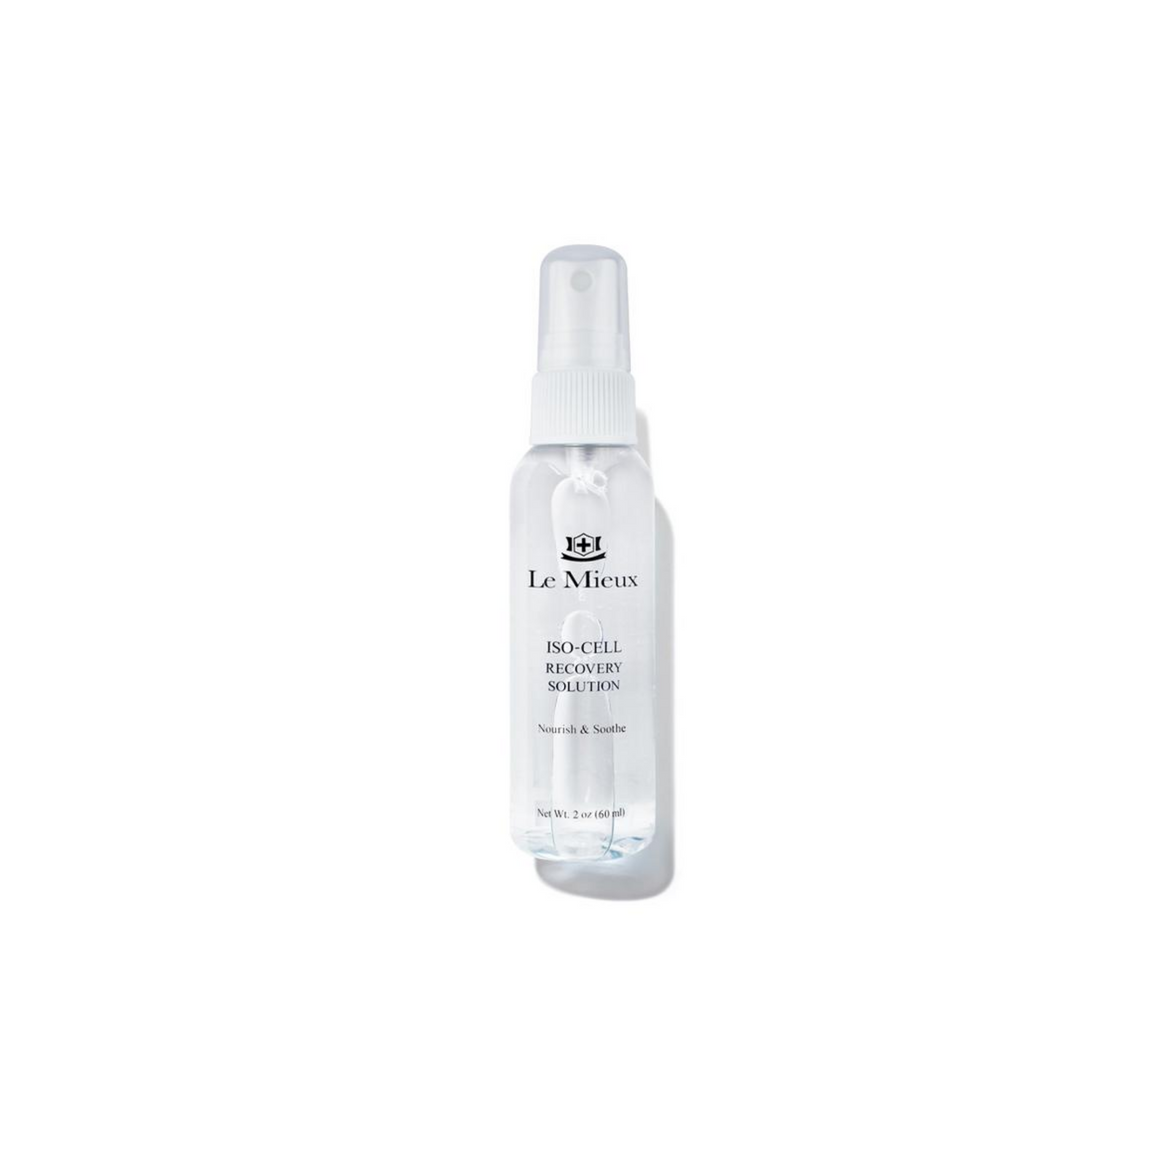 Le Mieux Iso-cell Recovery Solution ( Mist Treatment)